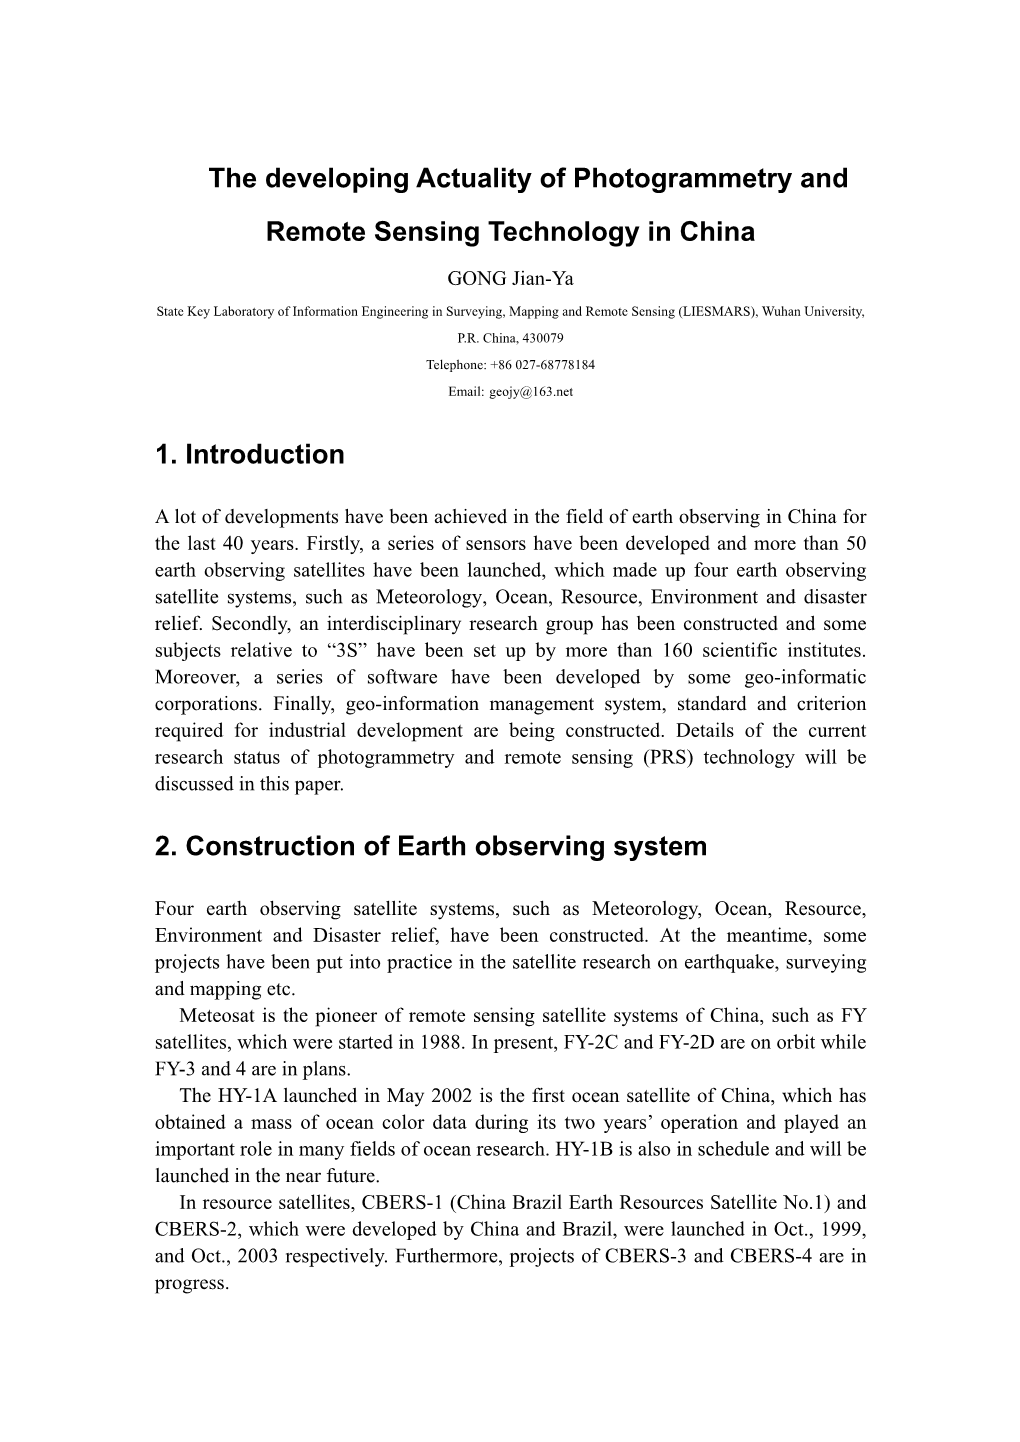 The Developing Actuality of Photogrammetry and Remote Sensing Technology in China